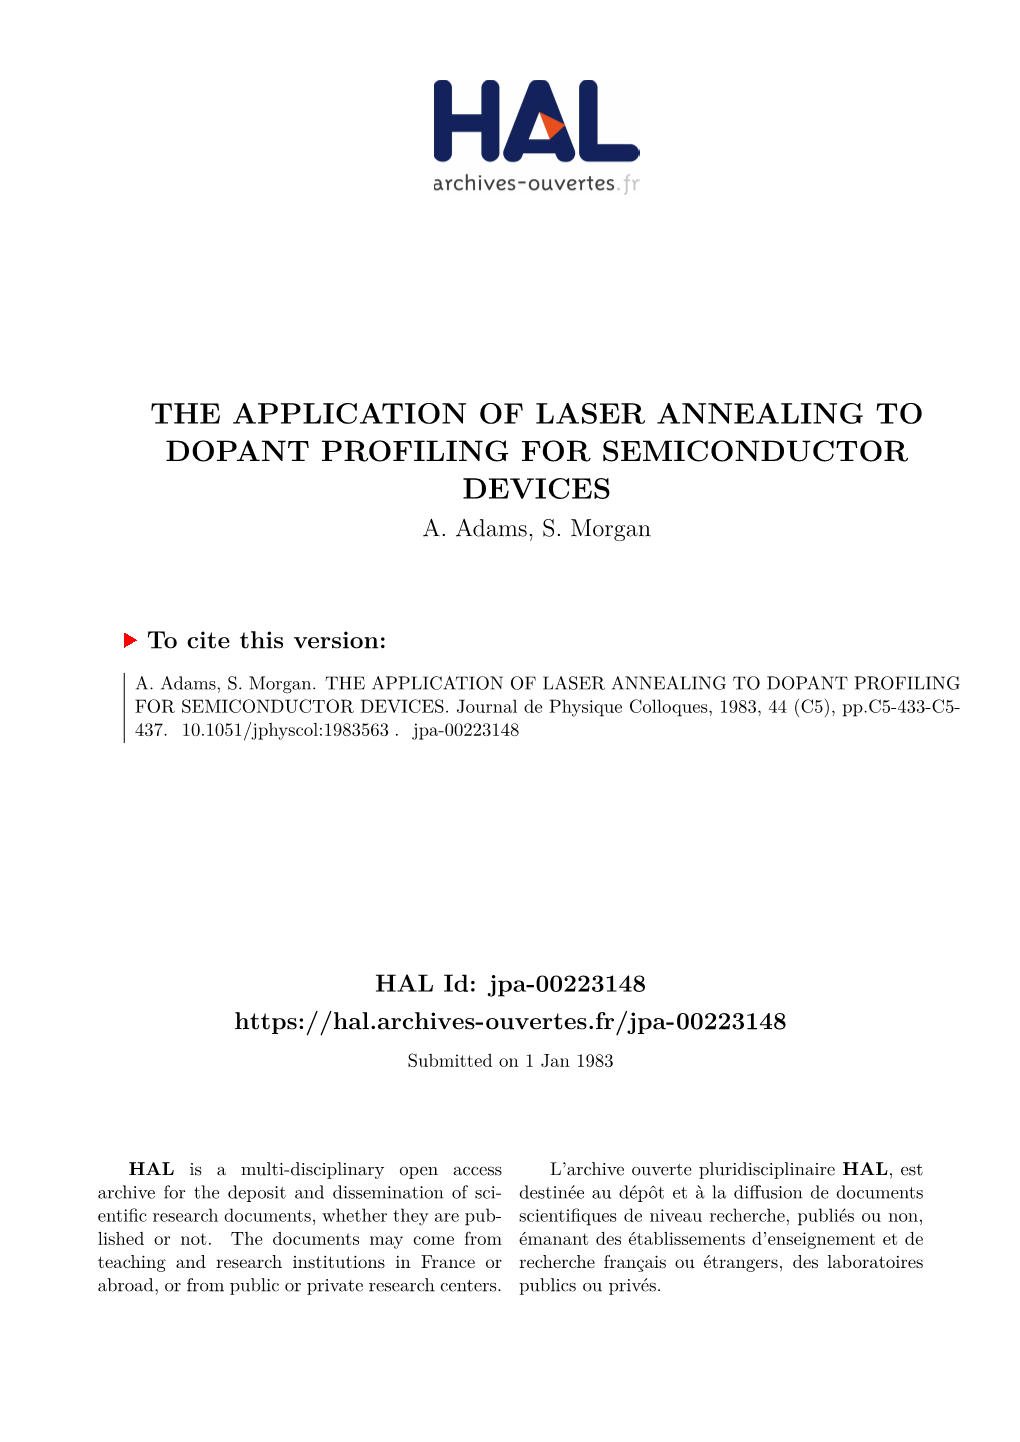 The Application of Laser Annealing to Dopant Profiling for Semiconductor Devices A